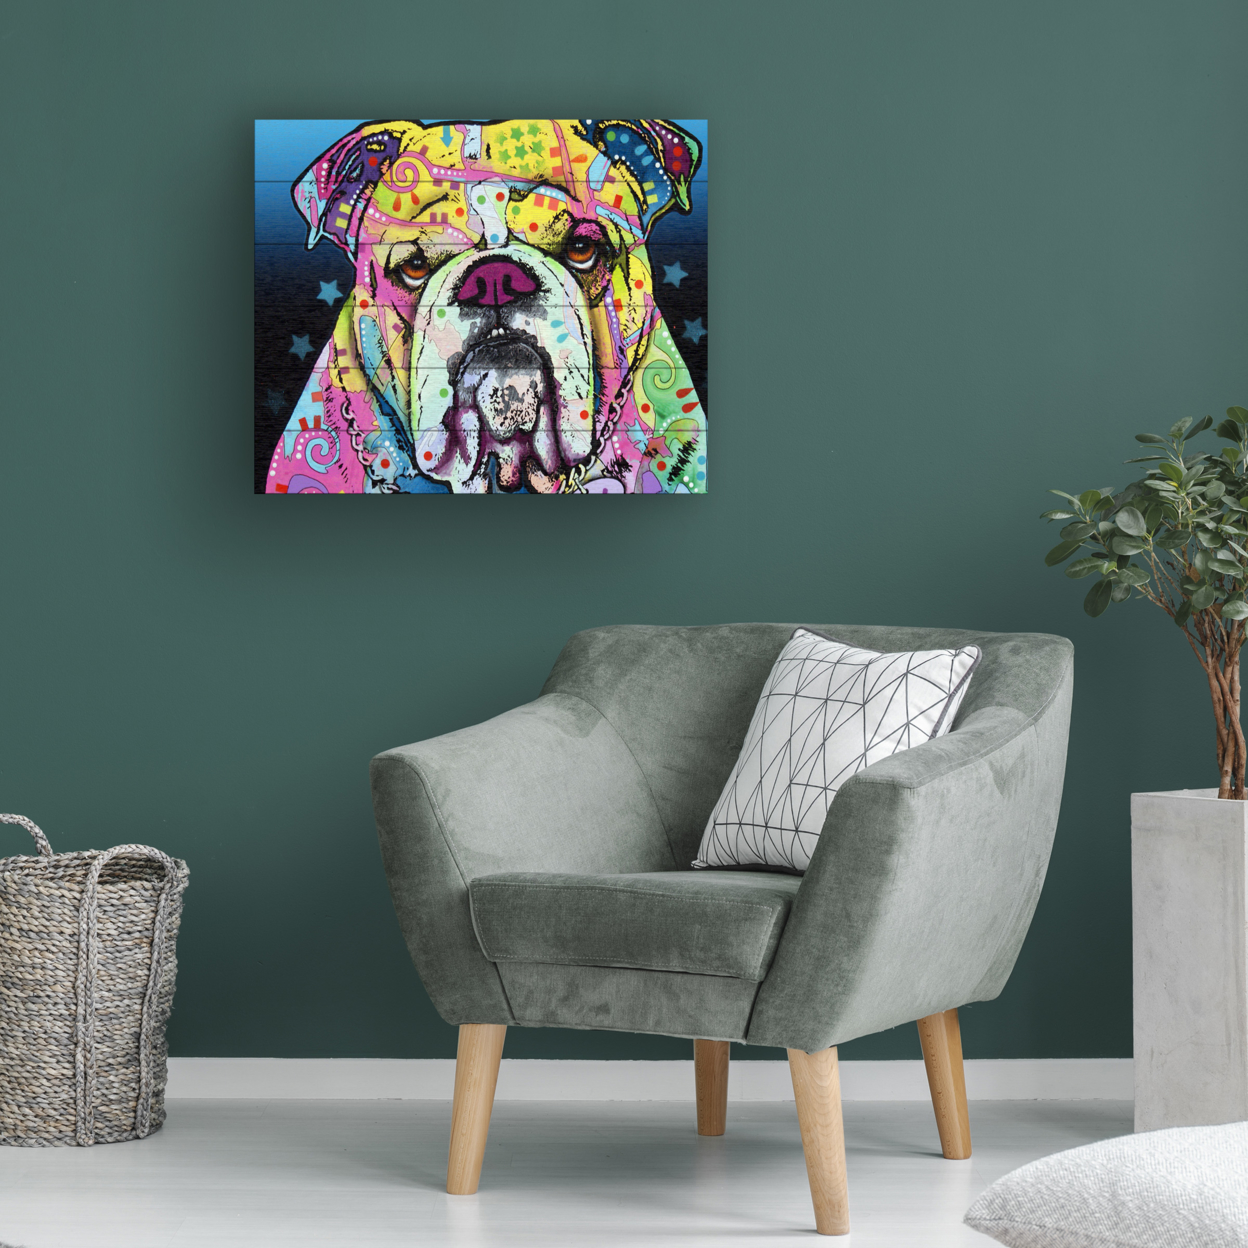 Wooden Slat Art 18 X 22 Inches Titled The Bulldog Ready To Hang Home Decor Picture